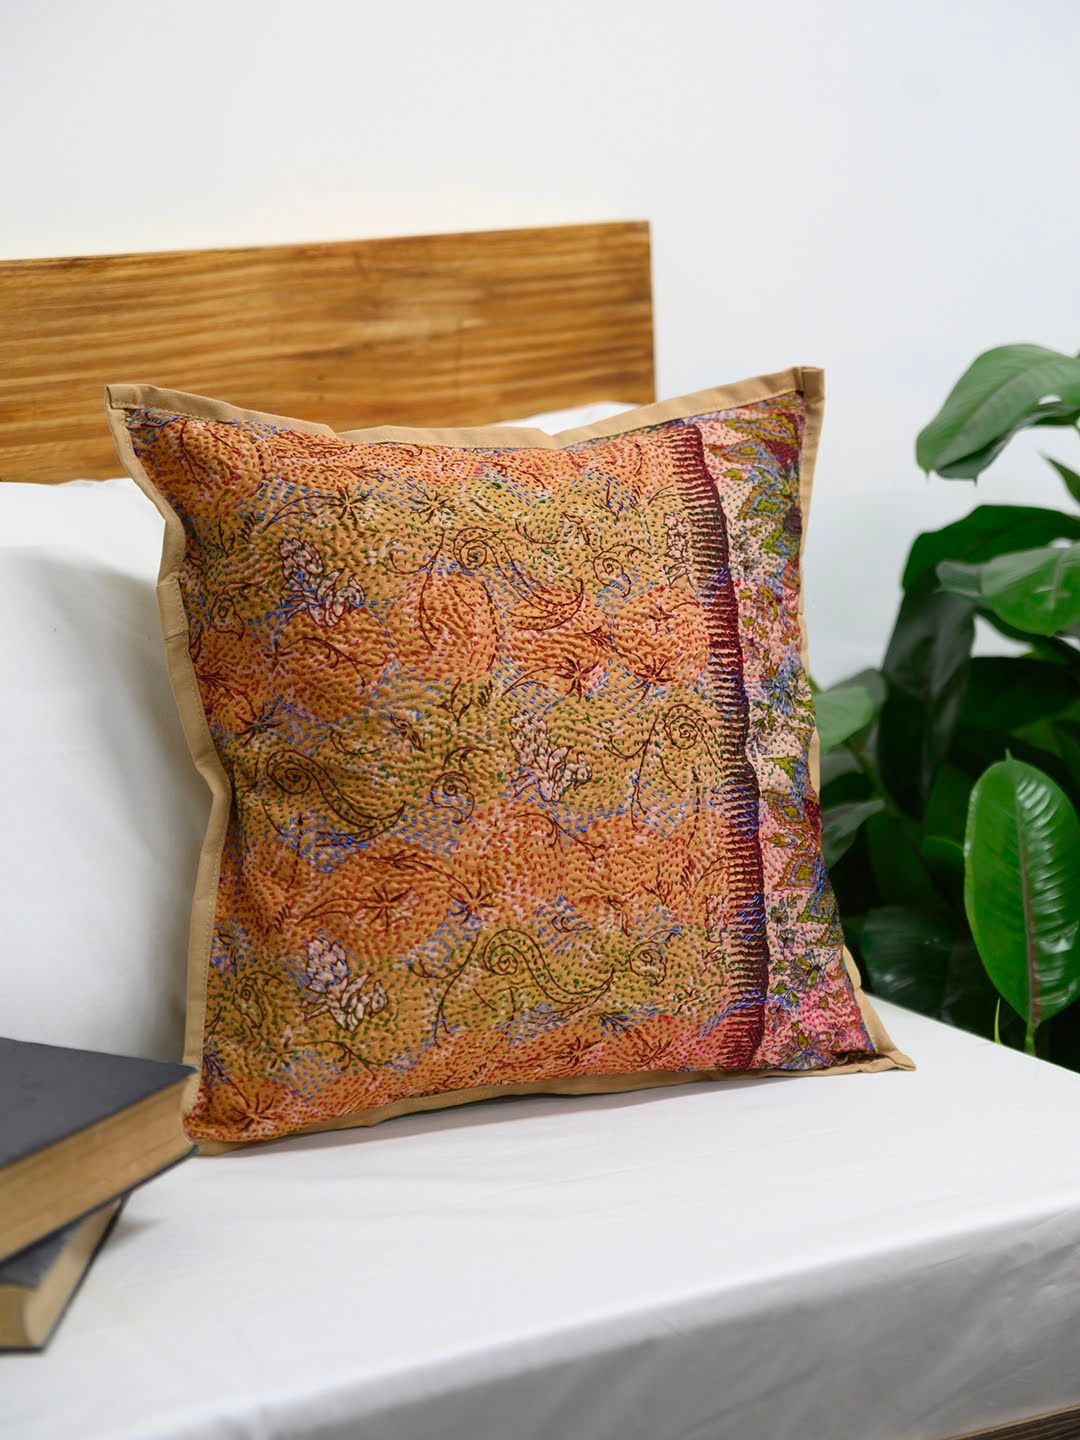 Red Beige Silk Hand Kantha stitch embroidered Reversible Cushion Cover - Pack of 1